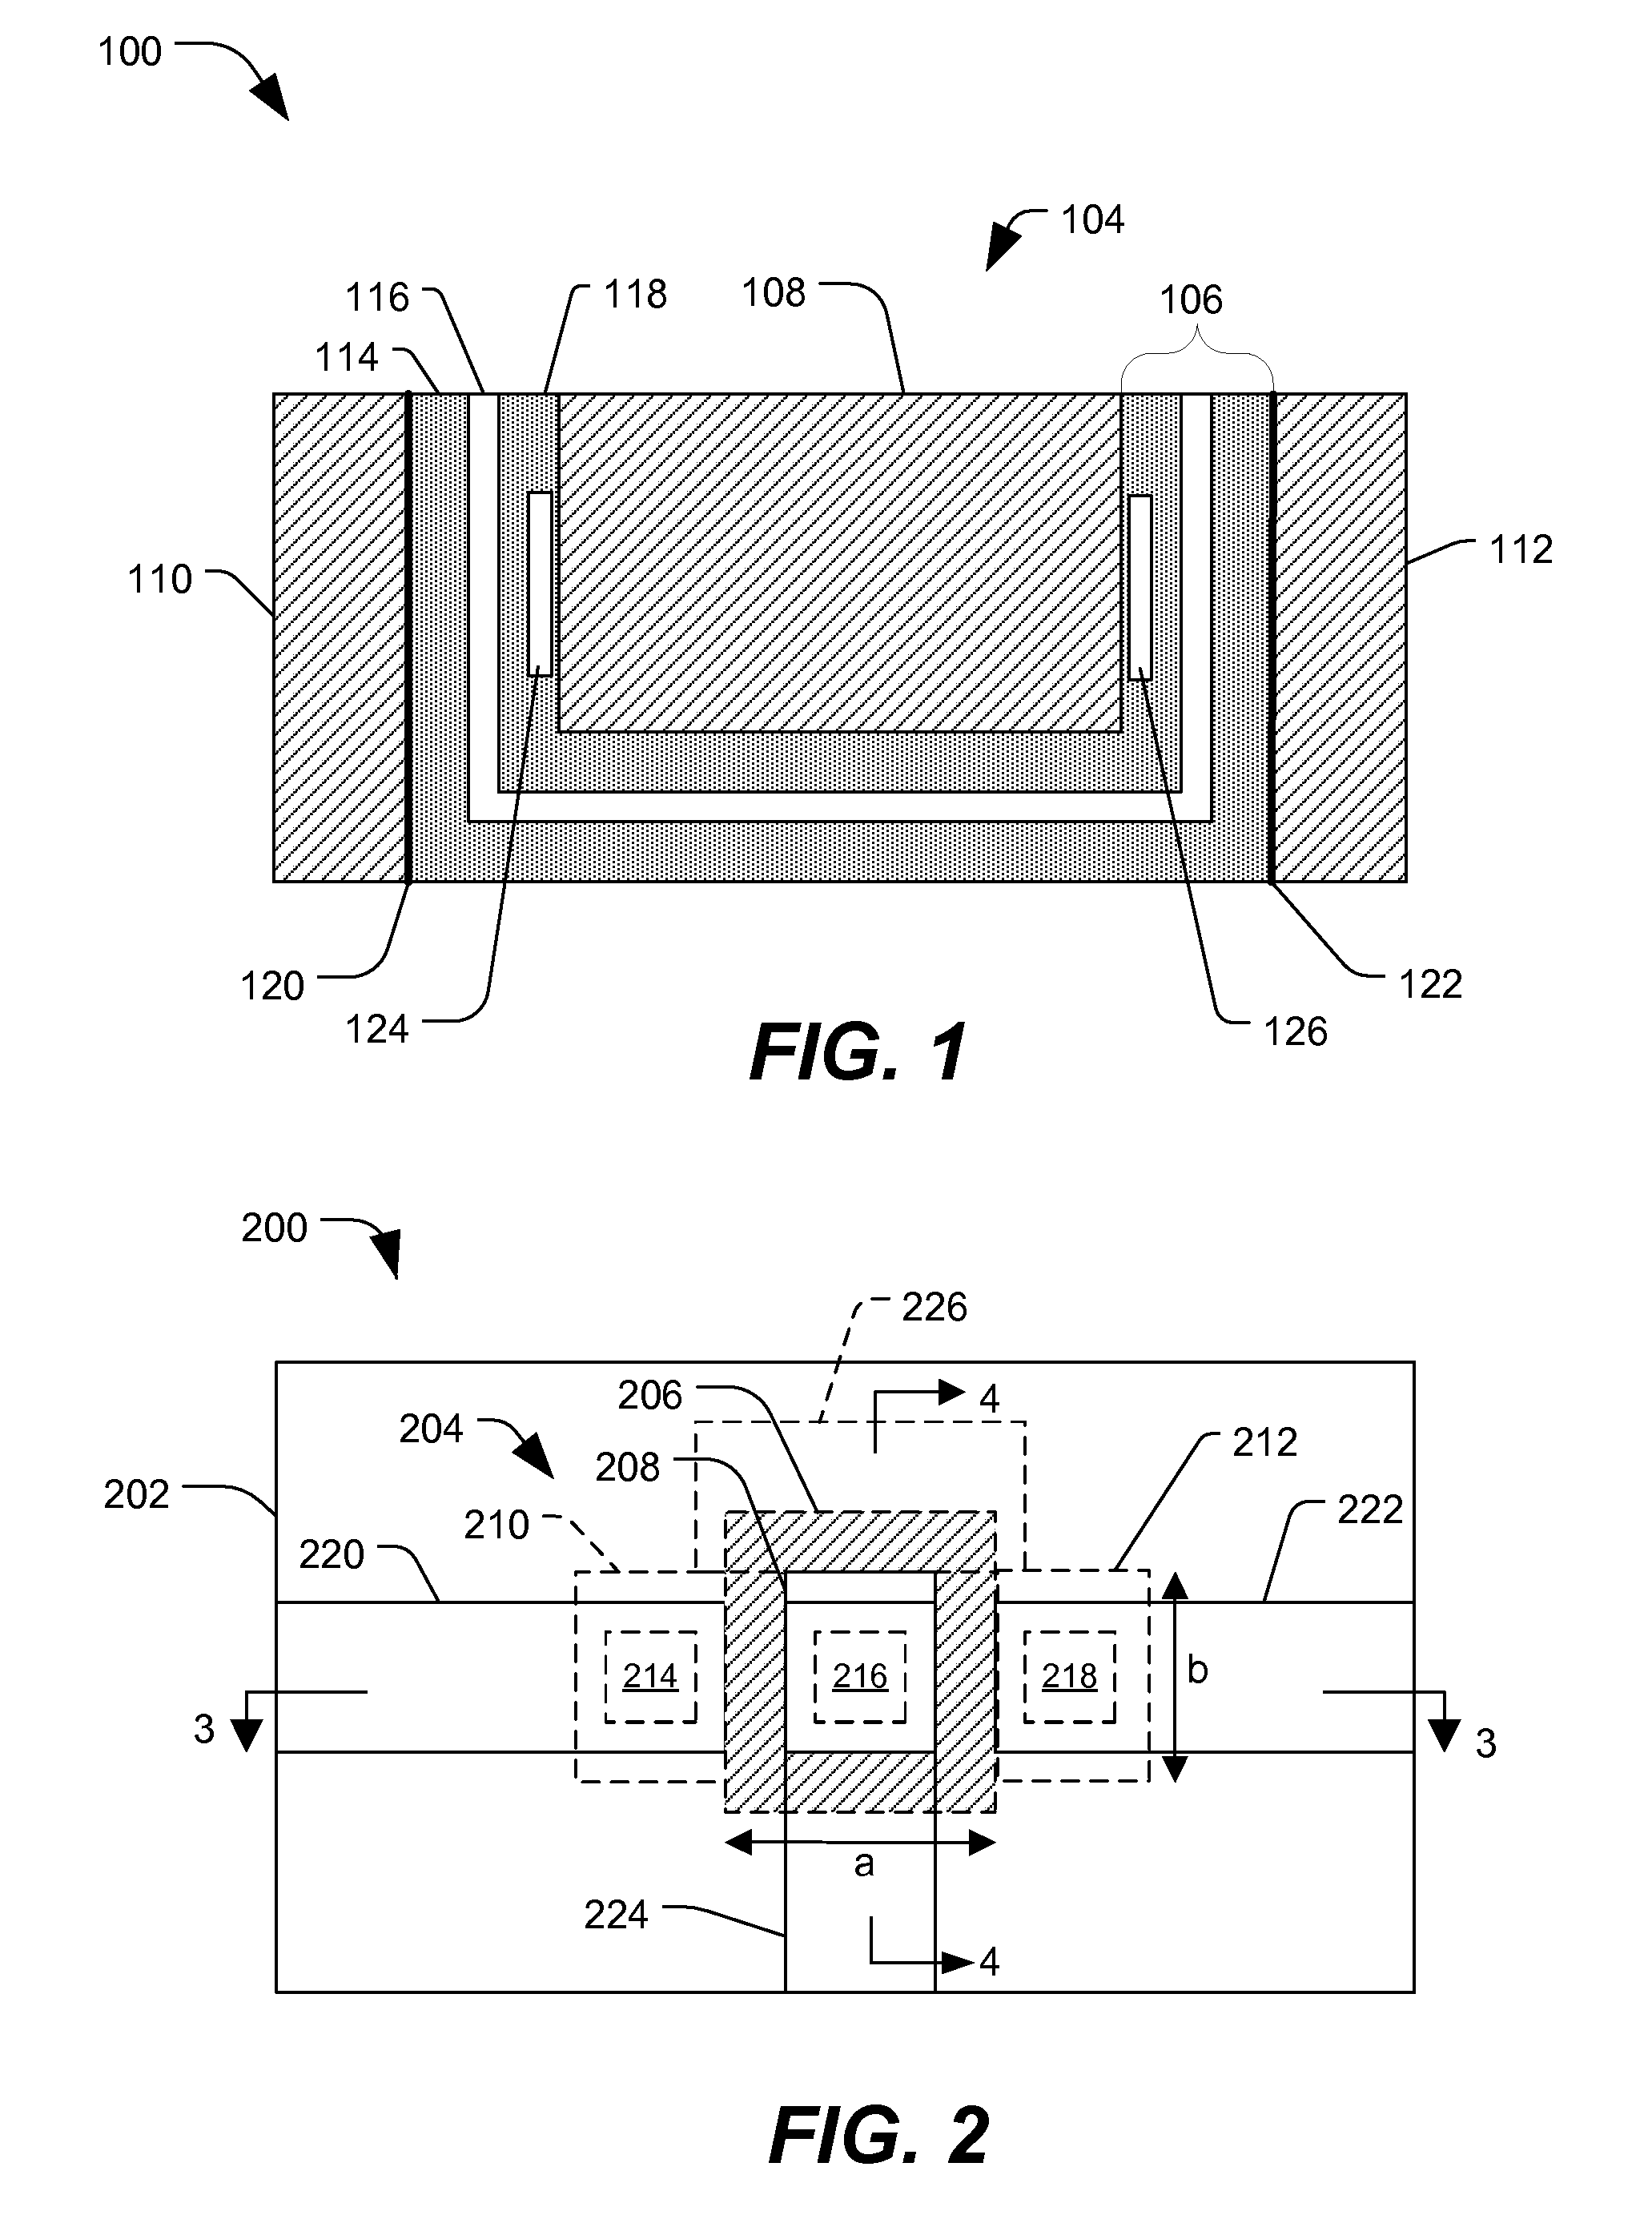 Method of Forming a Magnetic Tunnel Junction Device